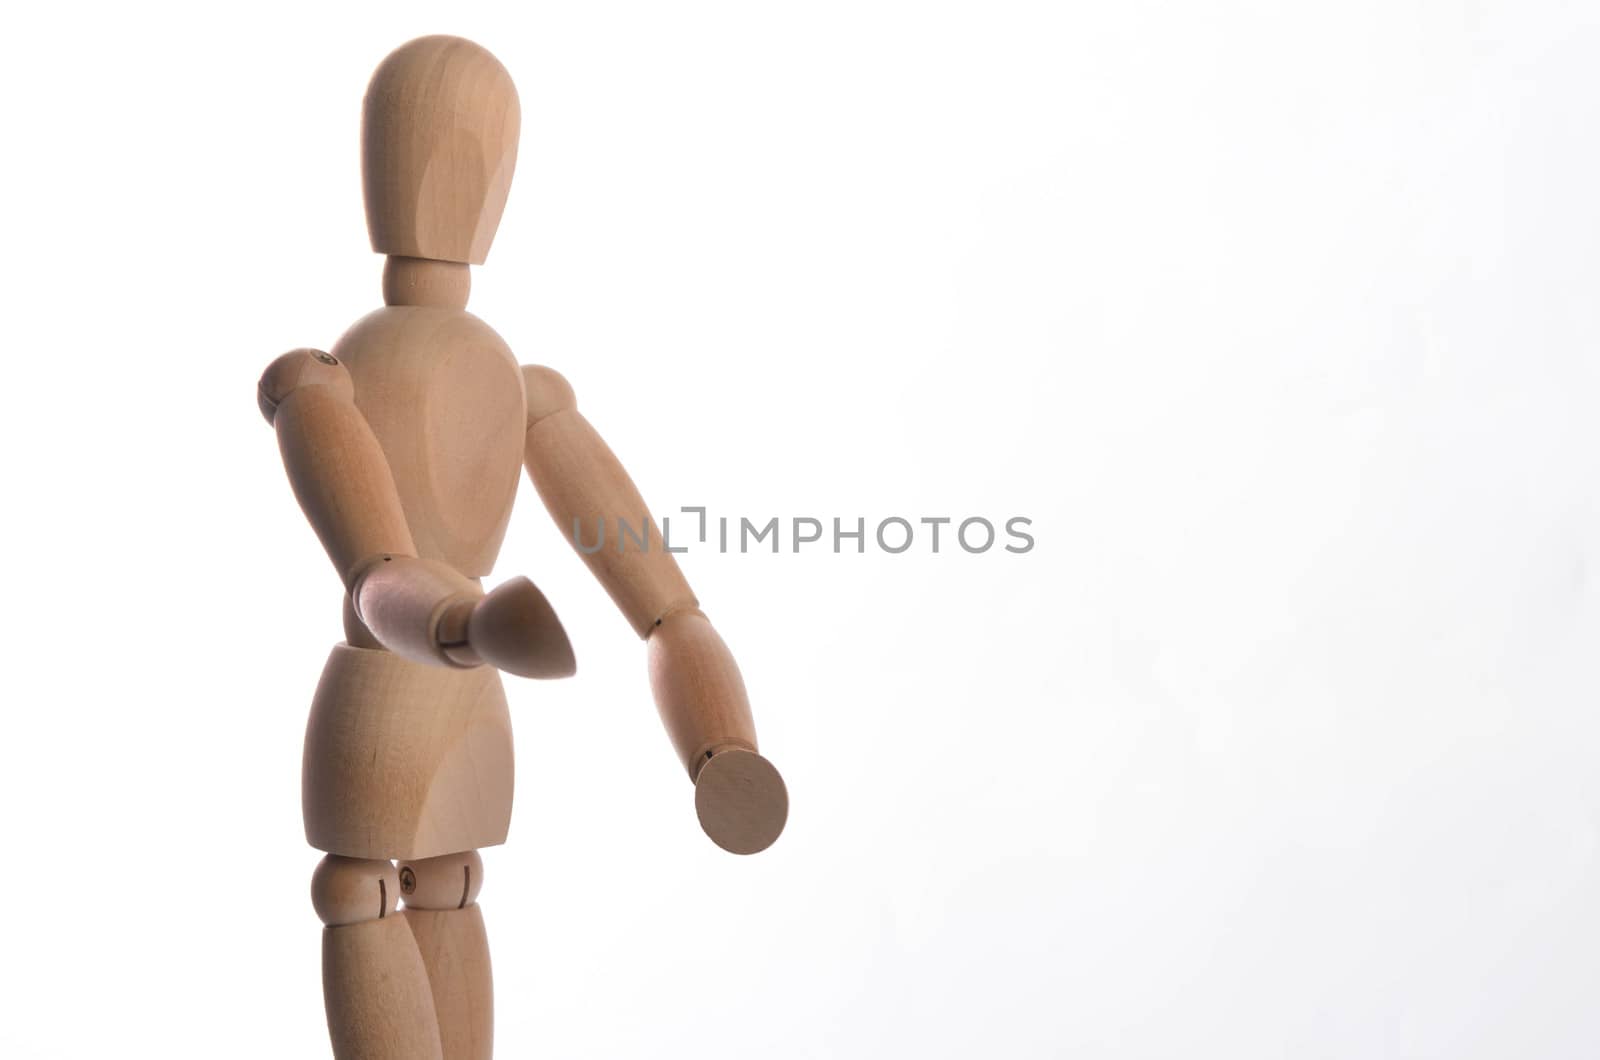 Wooden figure mannequin posing in action isolated on white background.